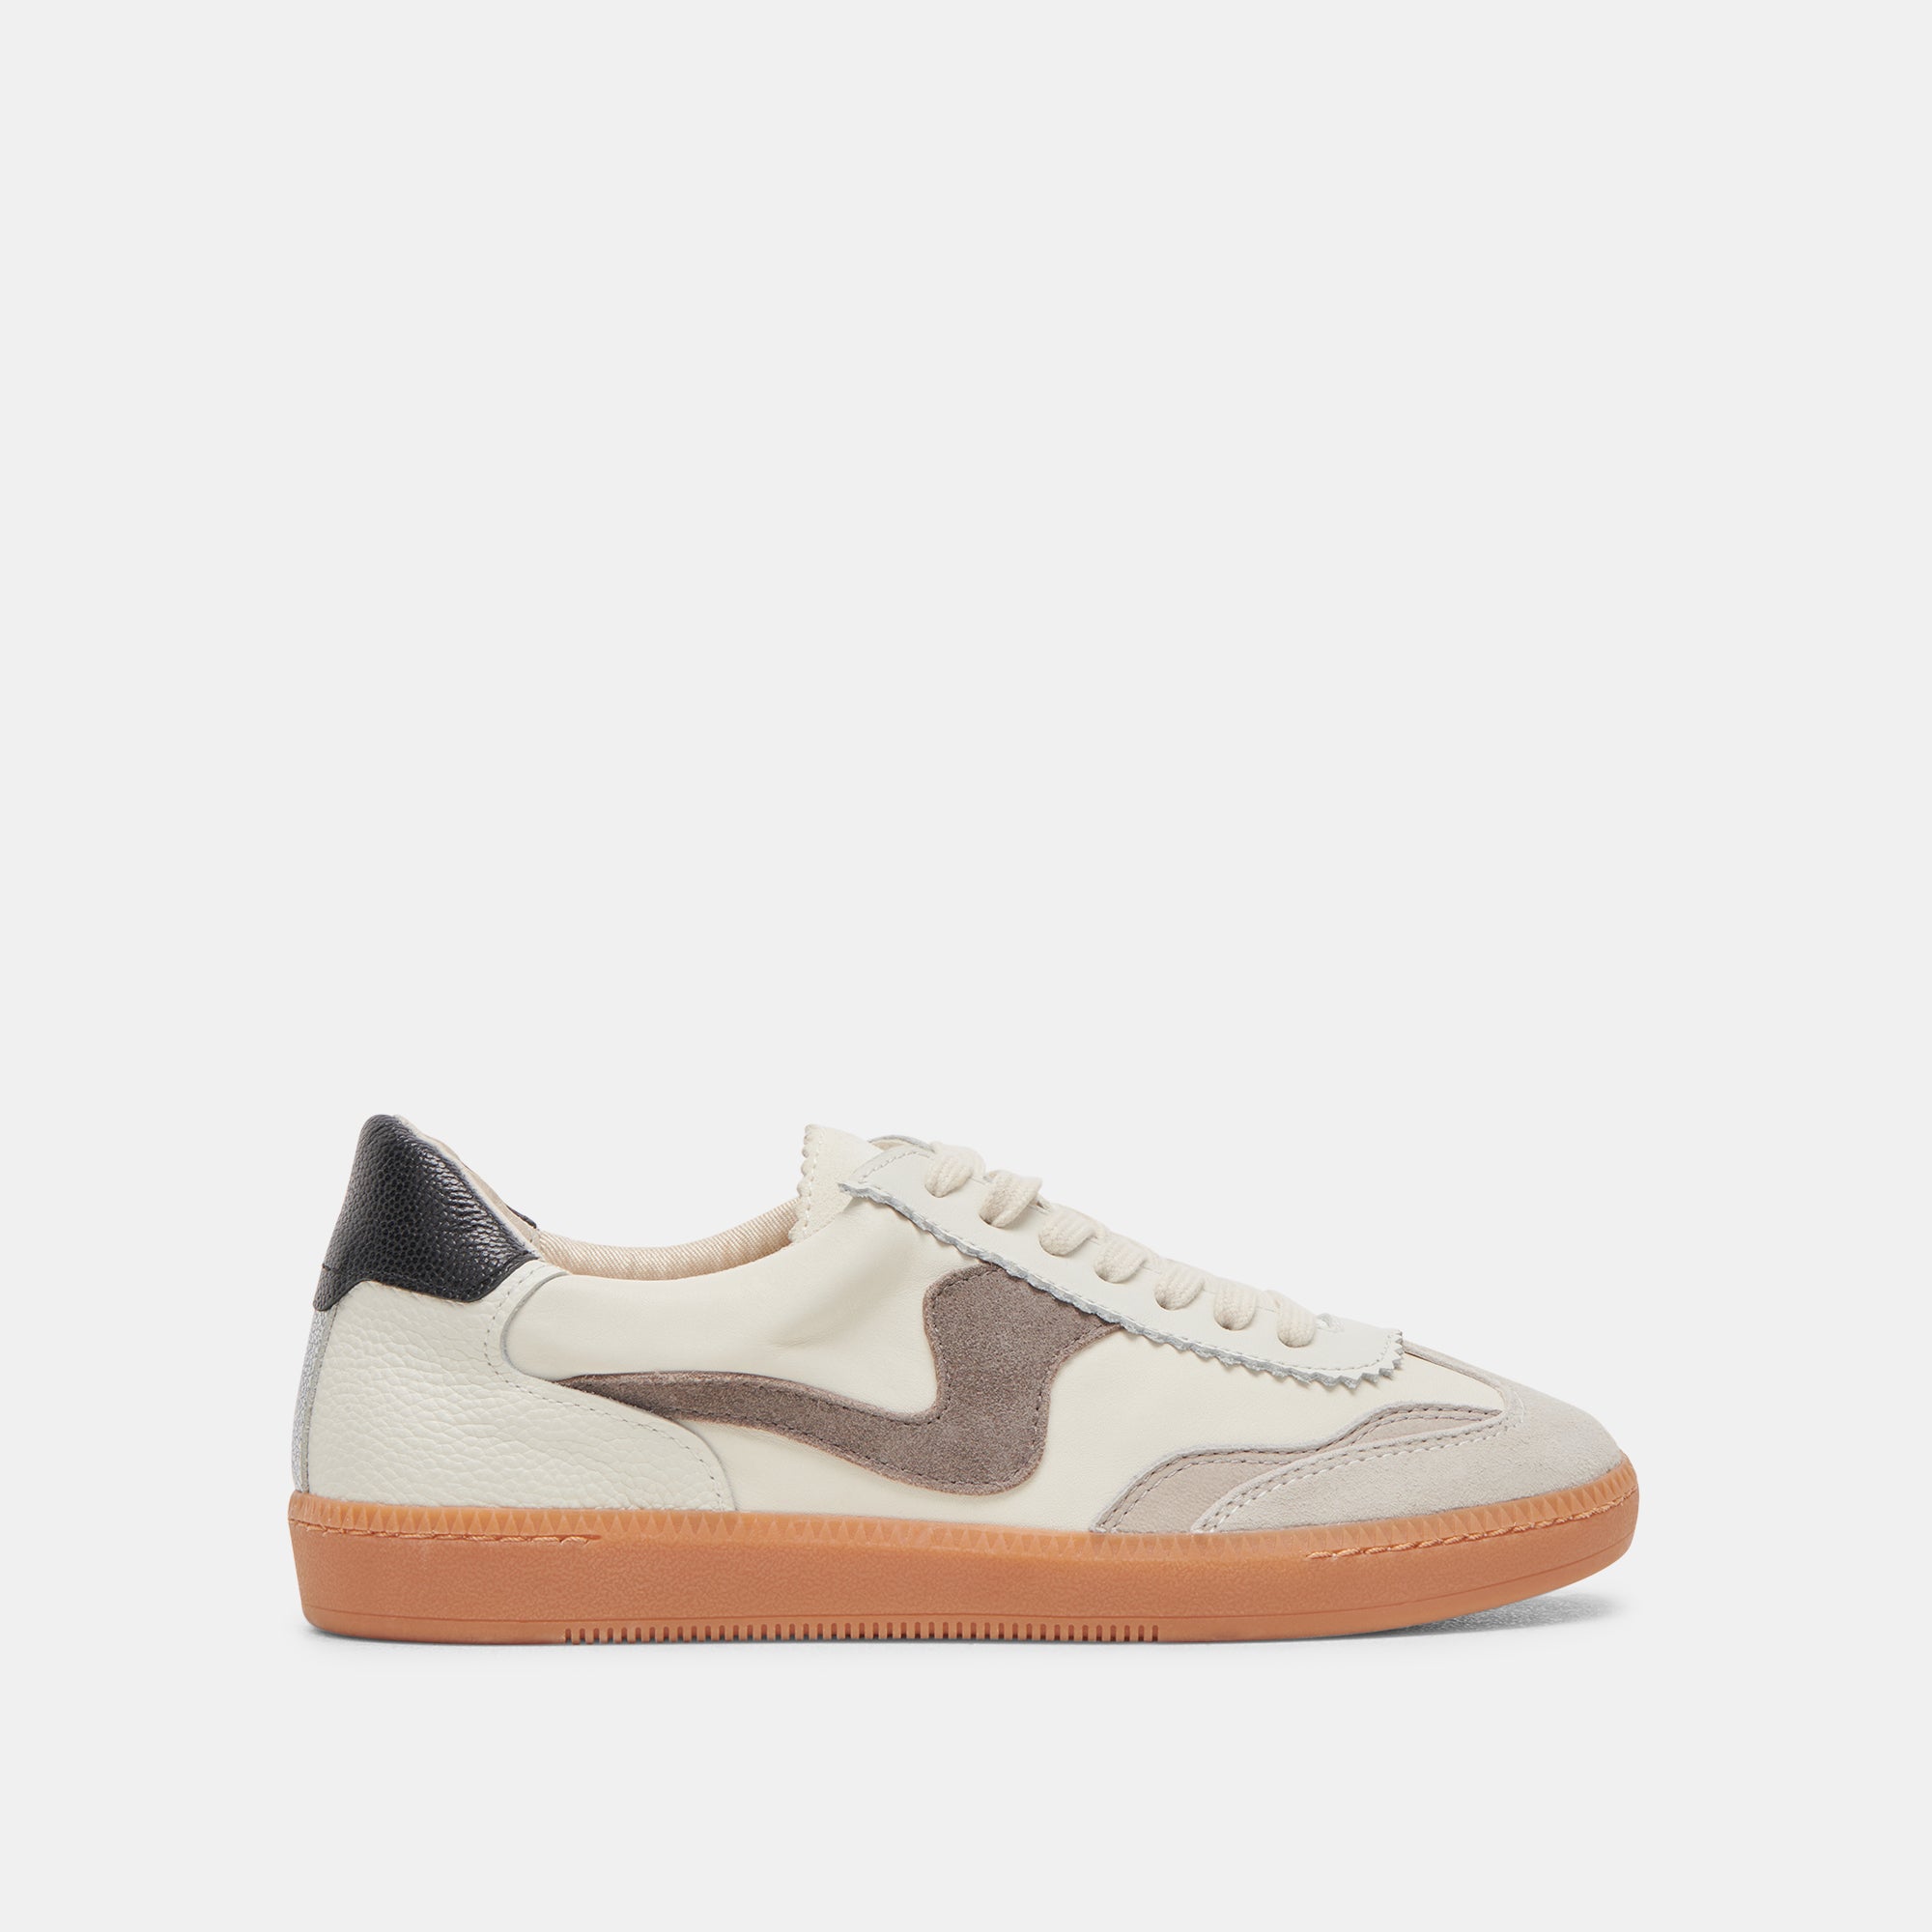 NOTICE SNEAKERS WHITE GREY LEATHER – Dolce Vita